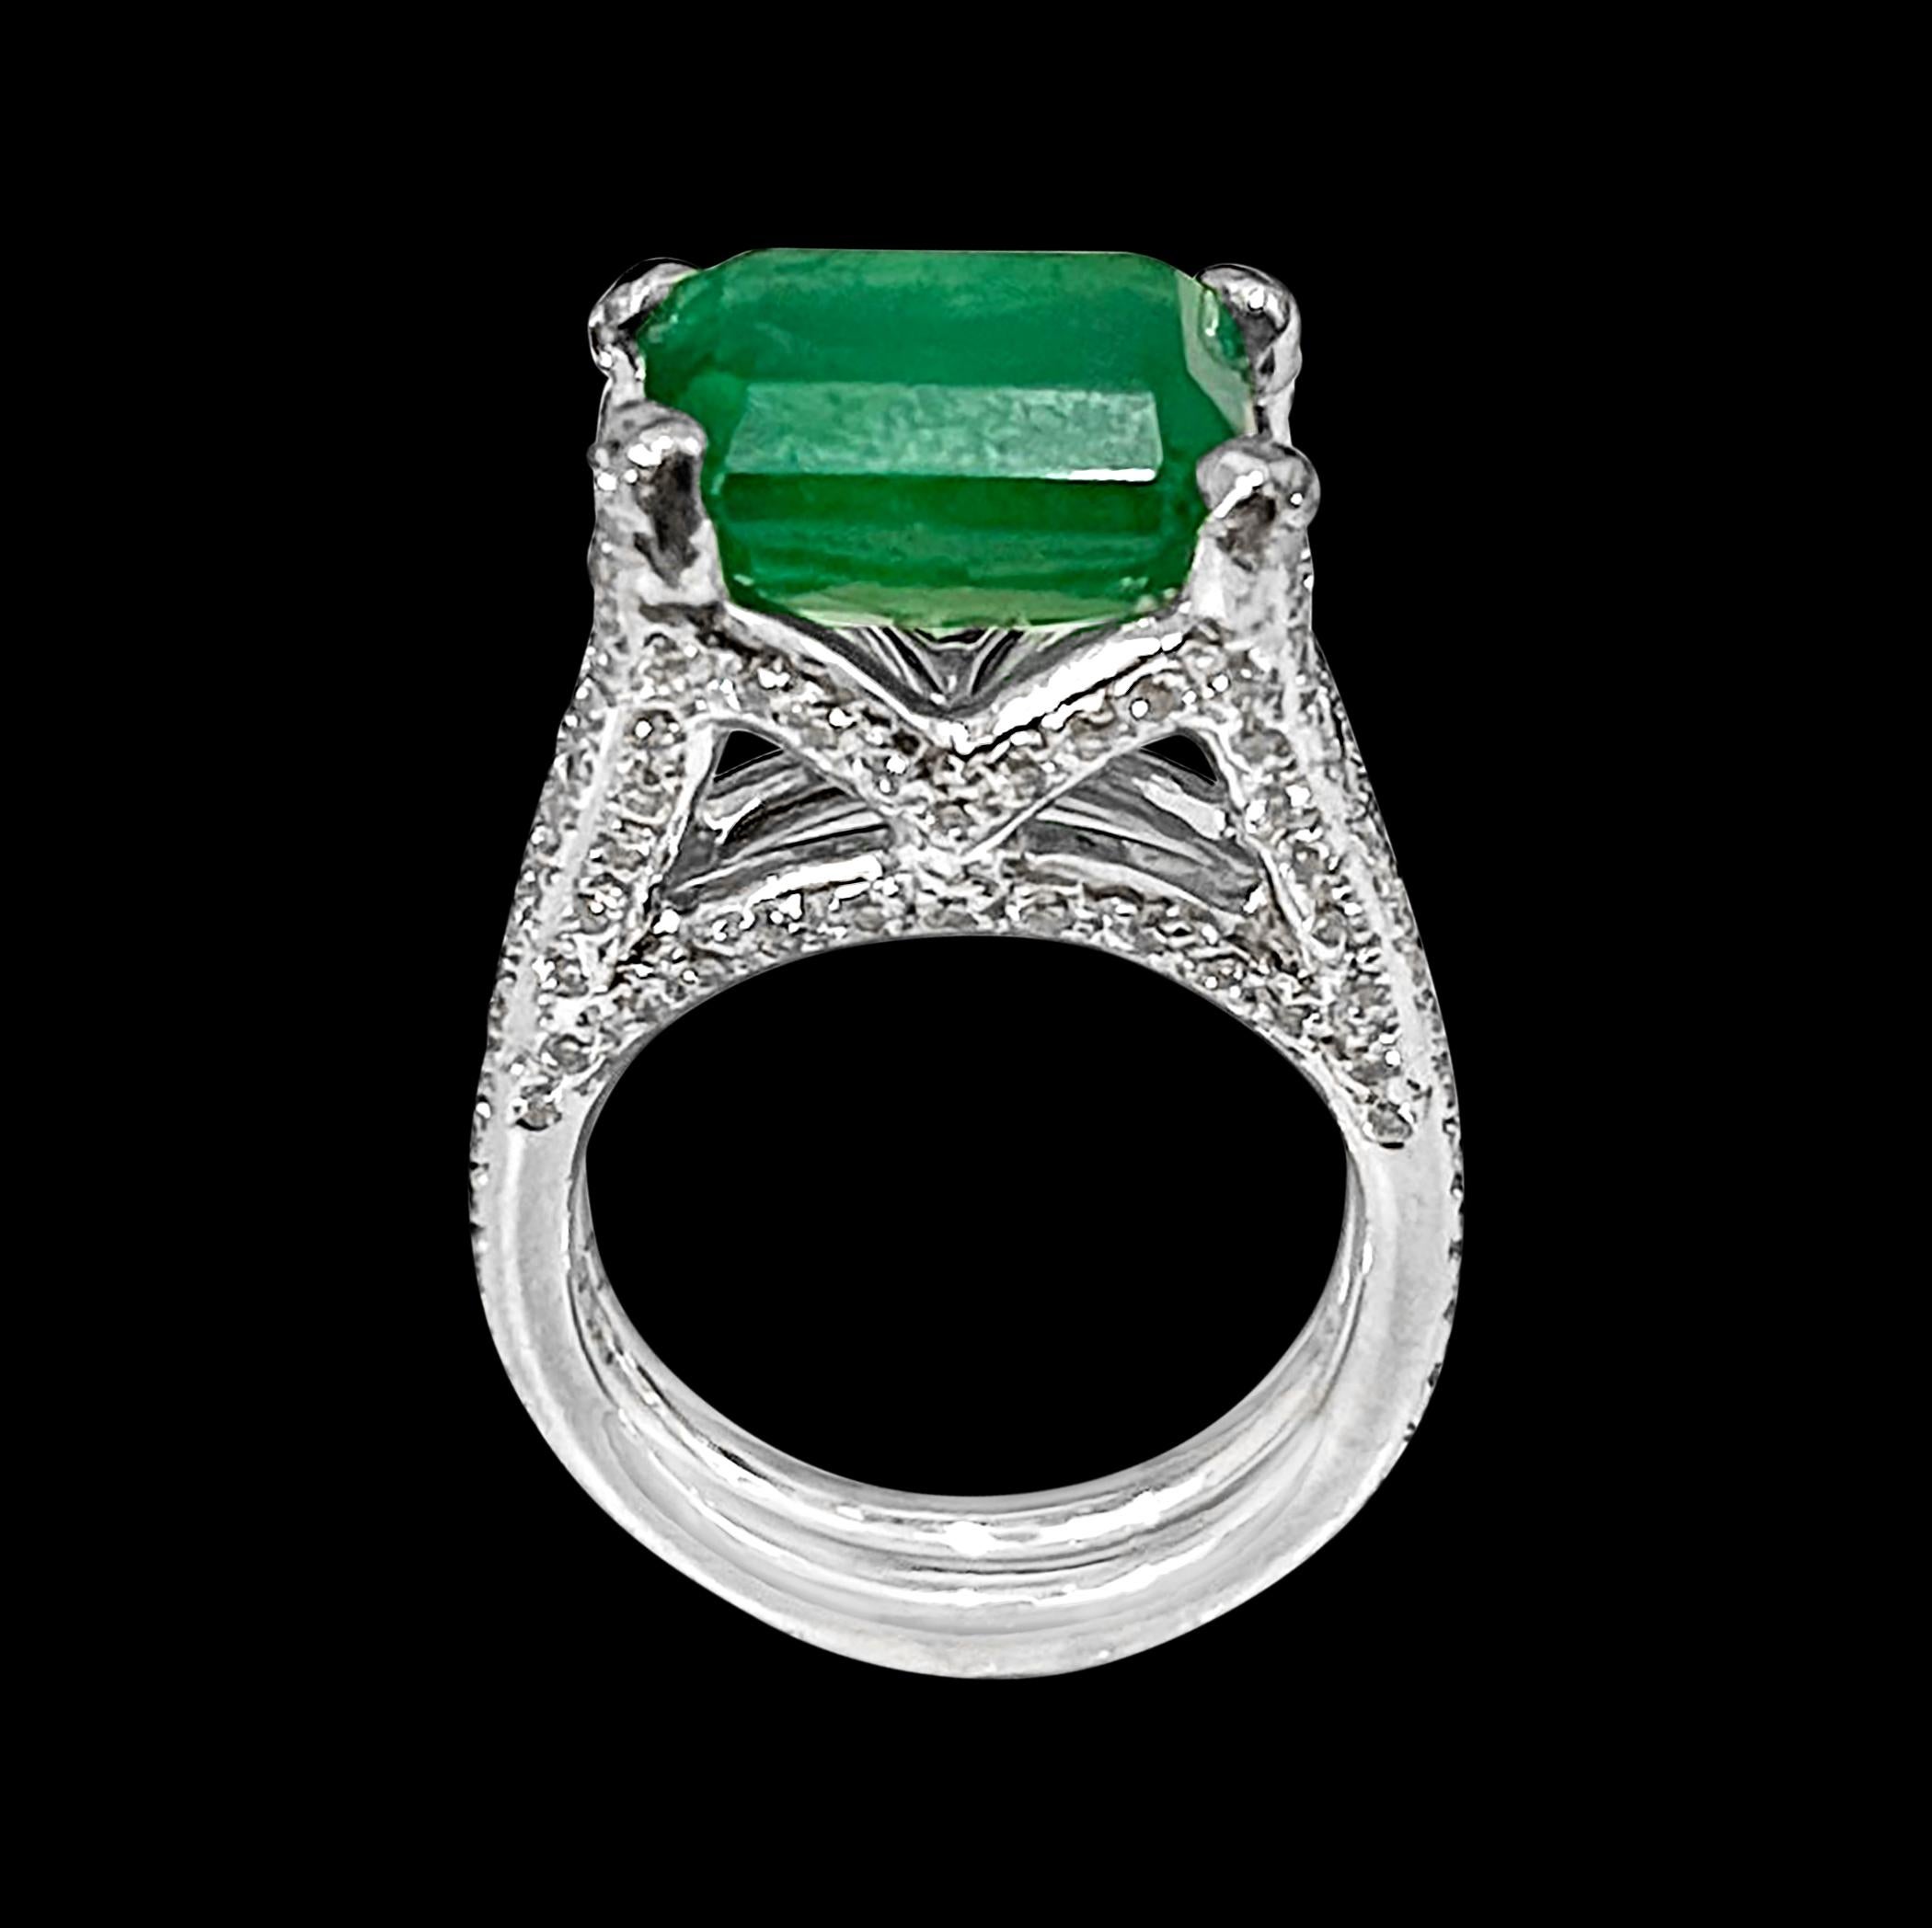 A classic, Cocktail ring 
Approximately 8.5 Carat  Emerald cut Emerald and 4 ct of Round brilliant cut diamond Ring, Estate.
Platinum 23.8 gm with stone
 Diamonds: approximate 4.5 Carat 
Emerald: 8.5 ct, Origin Zambia
Color: Deep  Green, Transparent